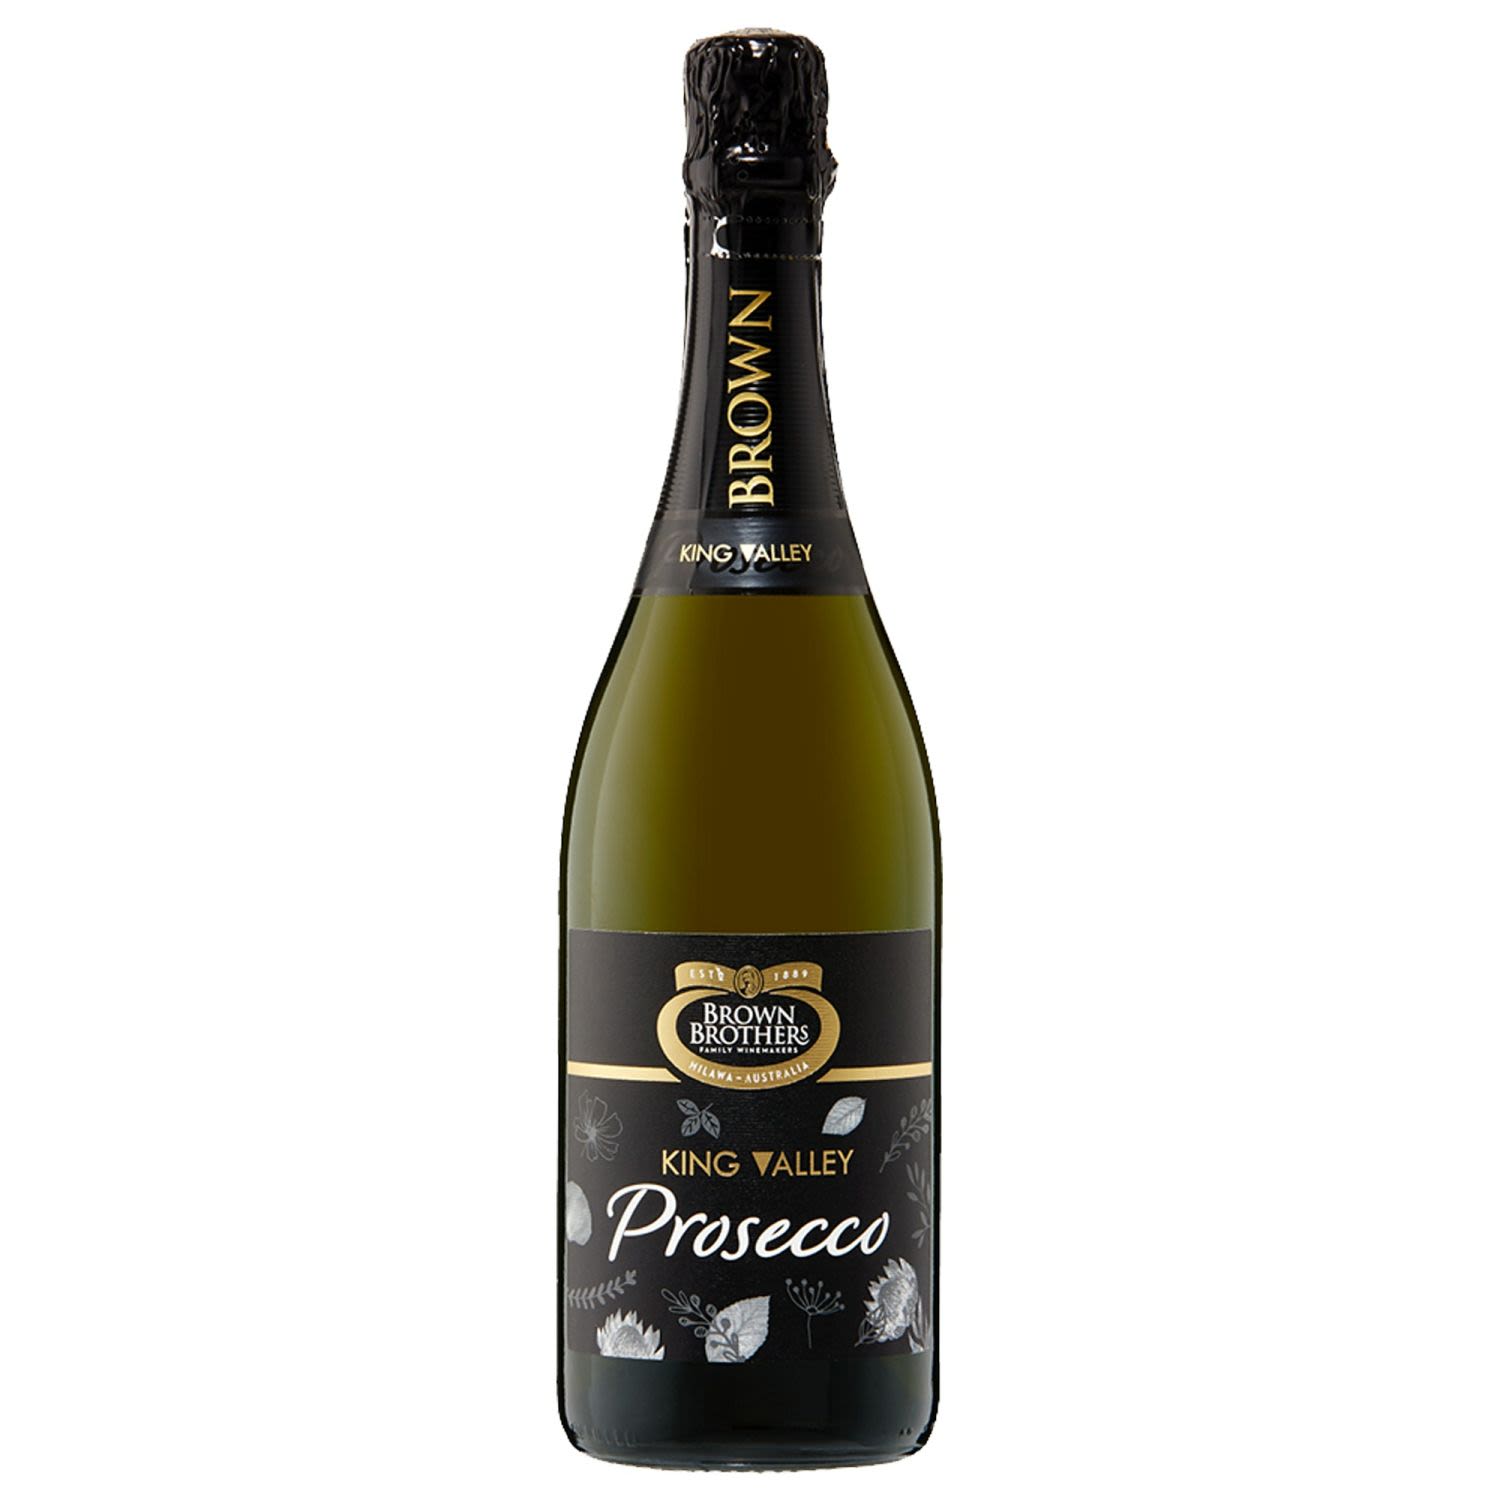 This King Valley Prosecco has a straw colour with subtle green hues. A delicate nose displaying apple and pear characters. While this wine retains the freshness and vibrancy that Prosecco is known for, the fruit for this NV release was picked later to provide a softer, rounder palate full of crisp citrus notes.  Prosecco is a great drink to kick off an evening and enjoy throughout the night. While delicious on its own, it is also perfect with sushi and sashimi. Prosecco is also excellent with charcuterie and marinated olives, or why not try it with a light brie cheese.  A vibrant and easy drinking sparkling wine from Victoria’s King Valley, the home of premium Prosecco, a refreshing sip for any occasion.<br /> <br />Alcohol Volume: 11.00%<br /><br />Pack Format: Bottle<br /><br />Standard Drinks: 6.5<br /><br />Pack Type: Bottle<br /><br />Country of Origin: Australia<br /><br />Region: King Valley<br /><br />Vintage: Non Vintage<br />